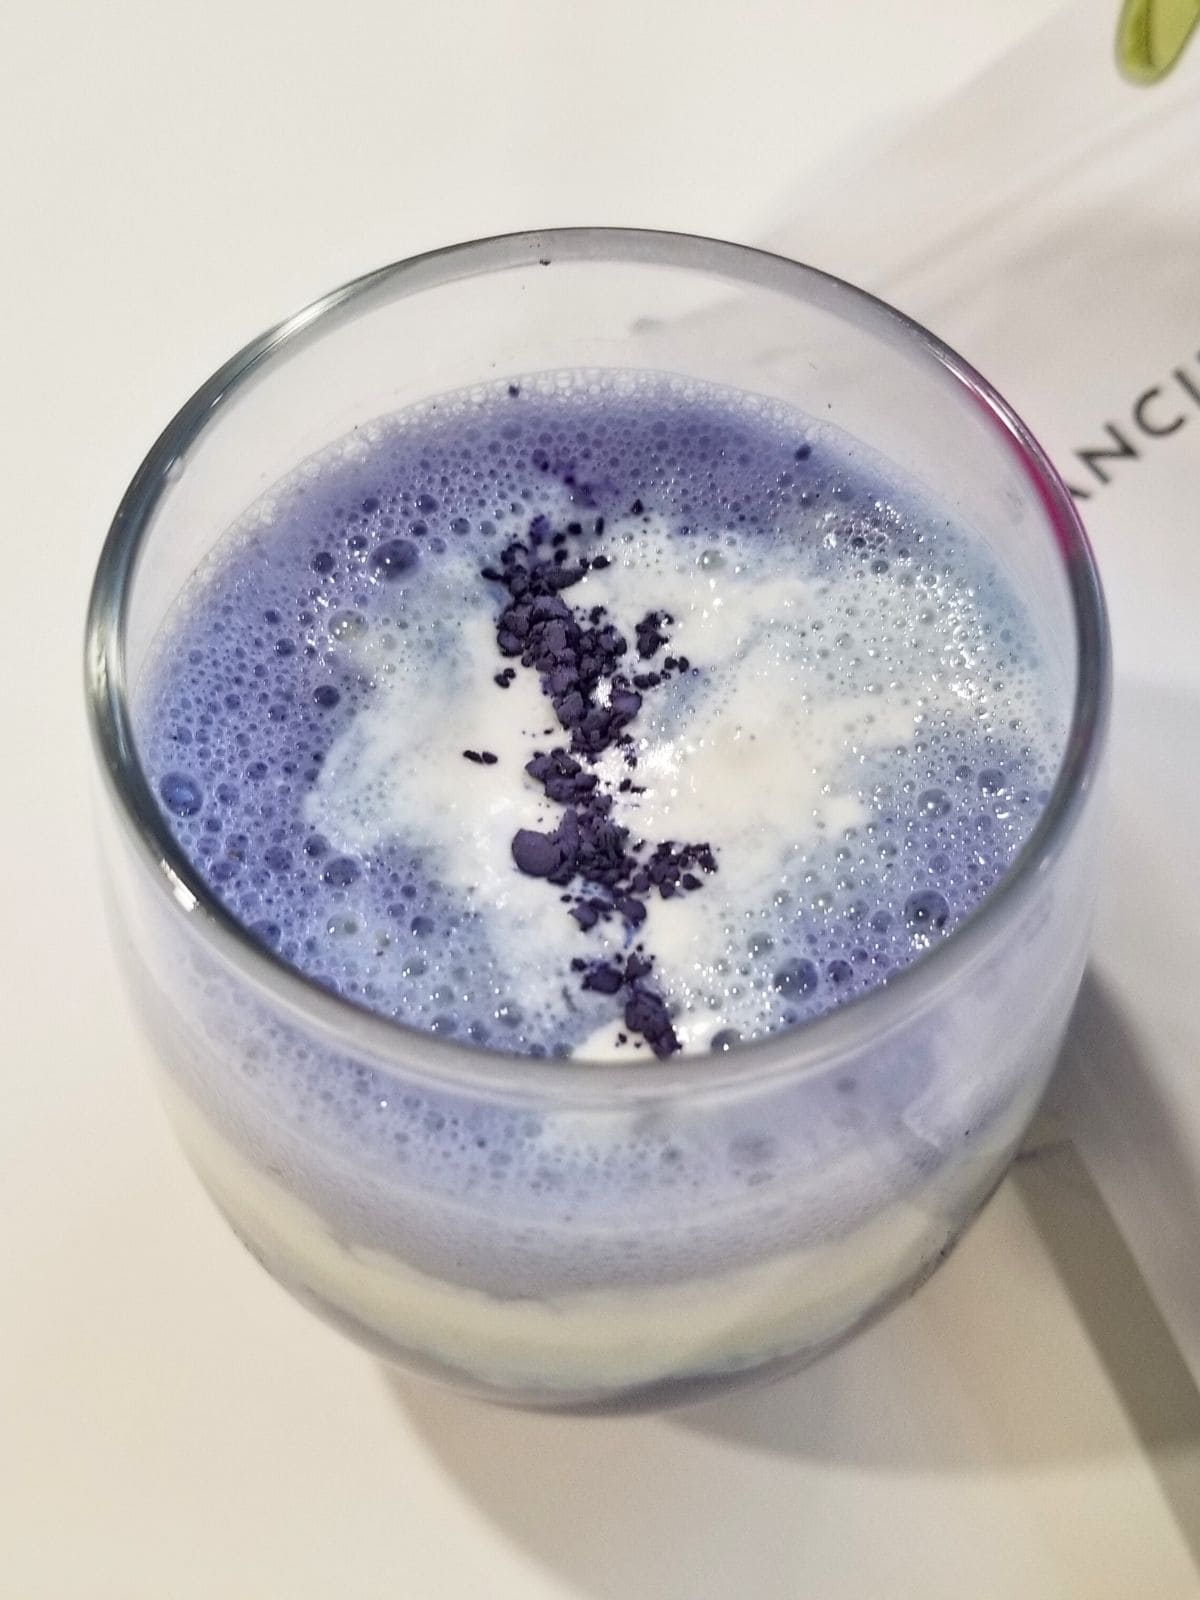 butterfly pea tea latte in a clear glass, topped with whipped cream.